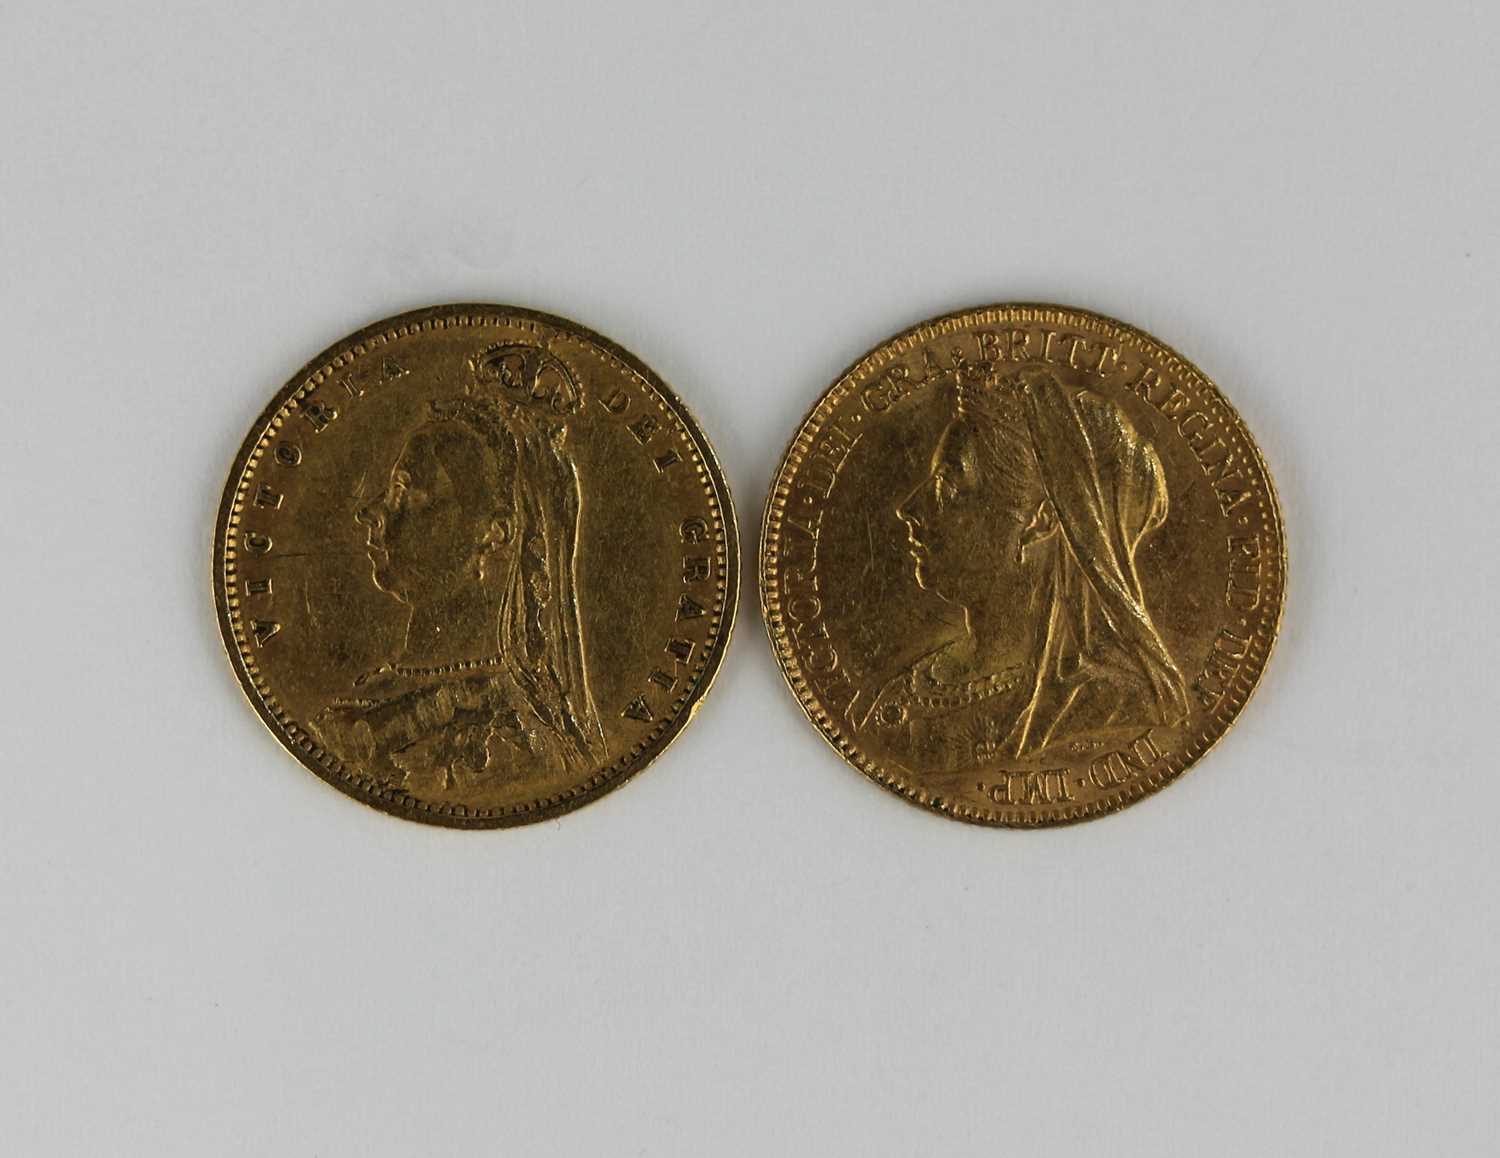 A Victoria Jubilee head half sovereign 1892 and a Victoria old head half sovereign 1897